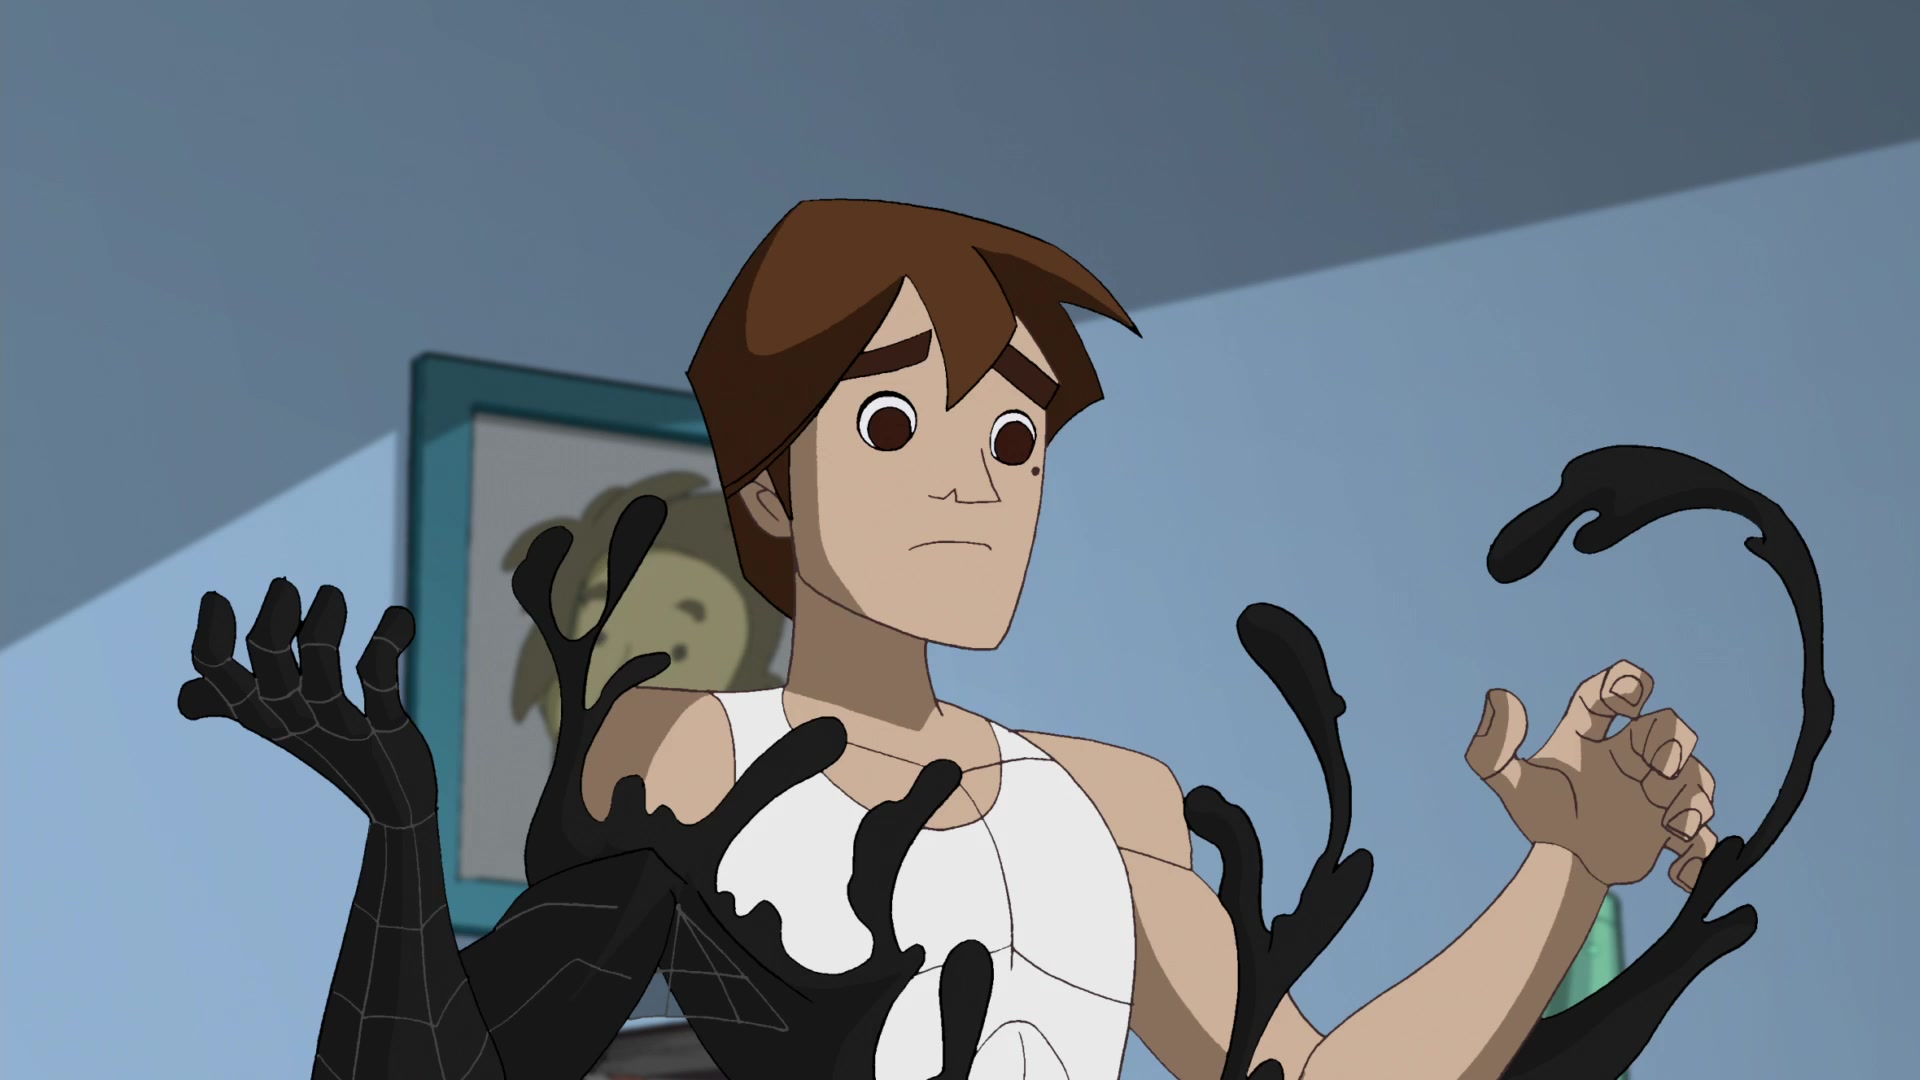 Peter Parker (Josh Keaton) is overtaken by the Venom symbiote in The Spectacular Spider-Man Season 1 Episode 11 "Group Therapy" (2008), Marvel Entertainment